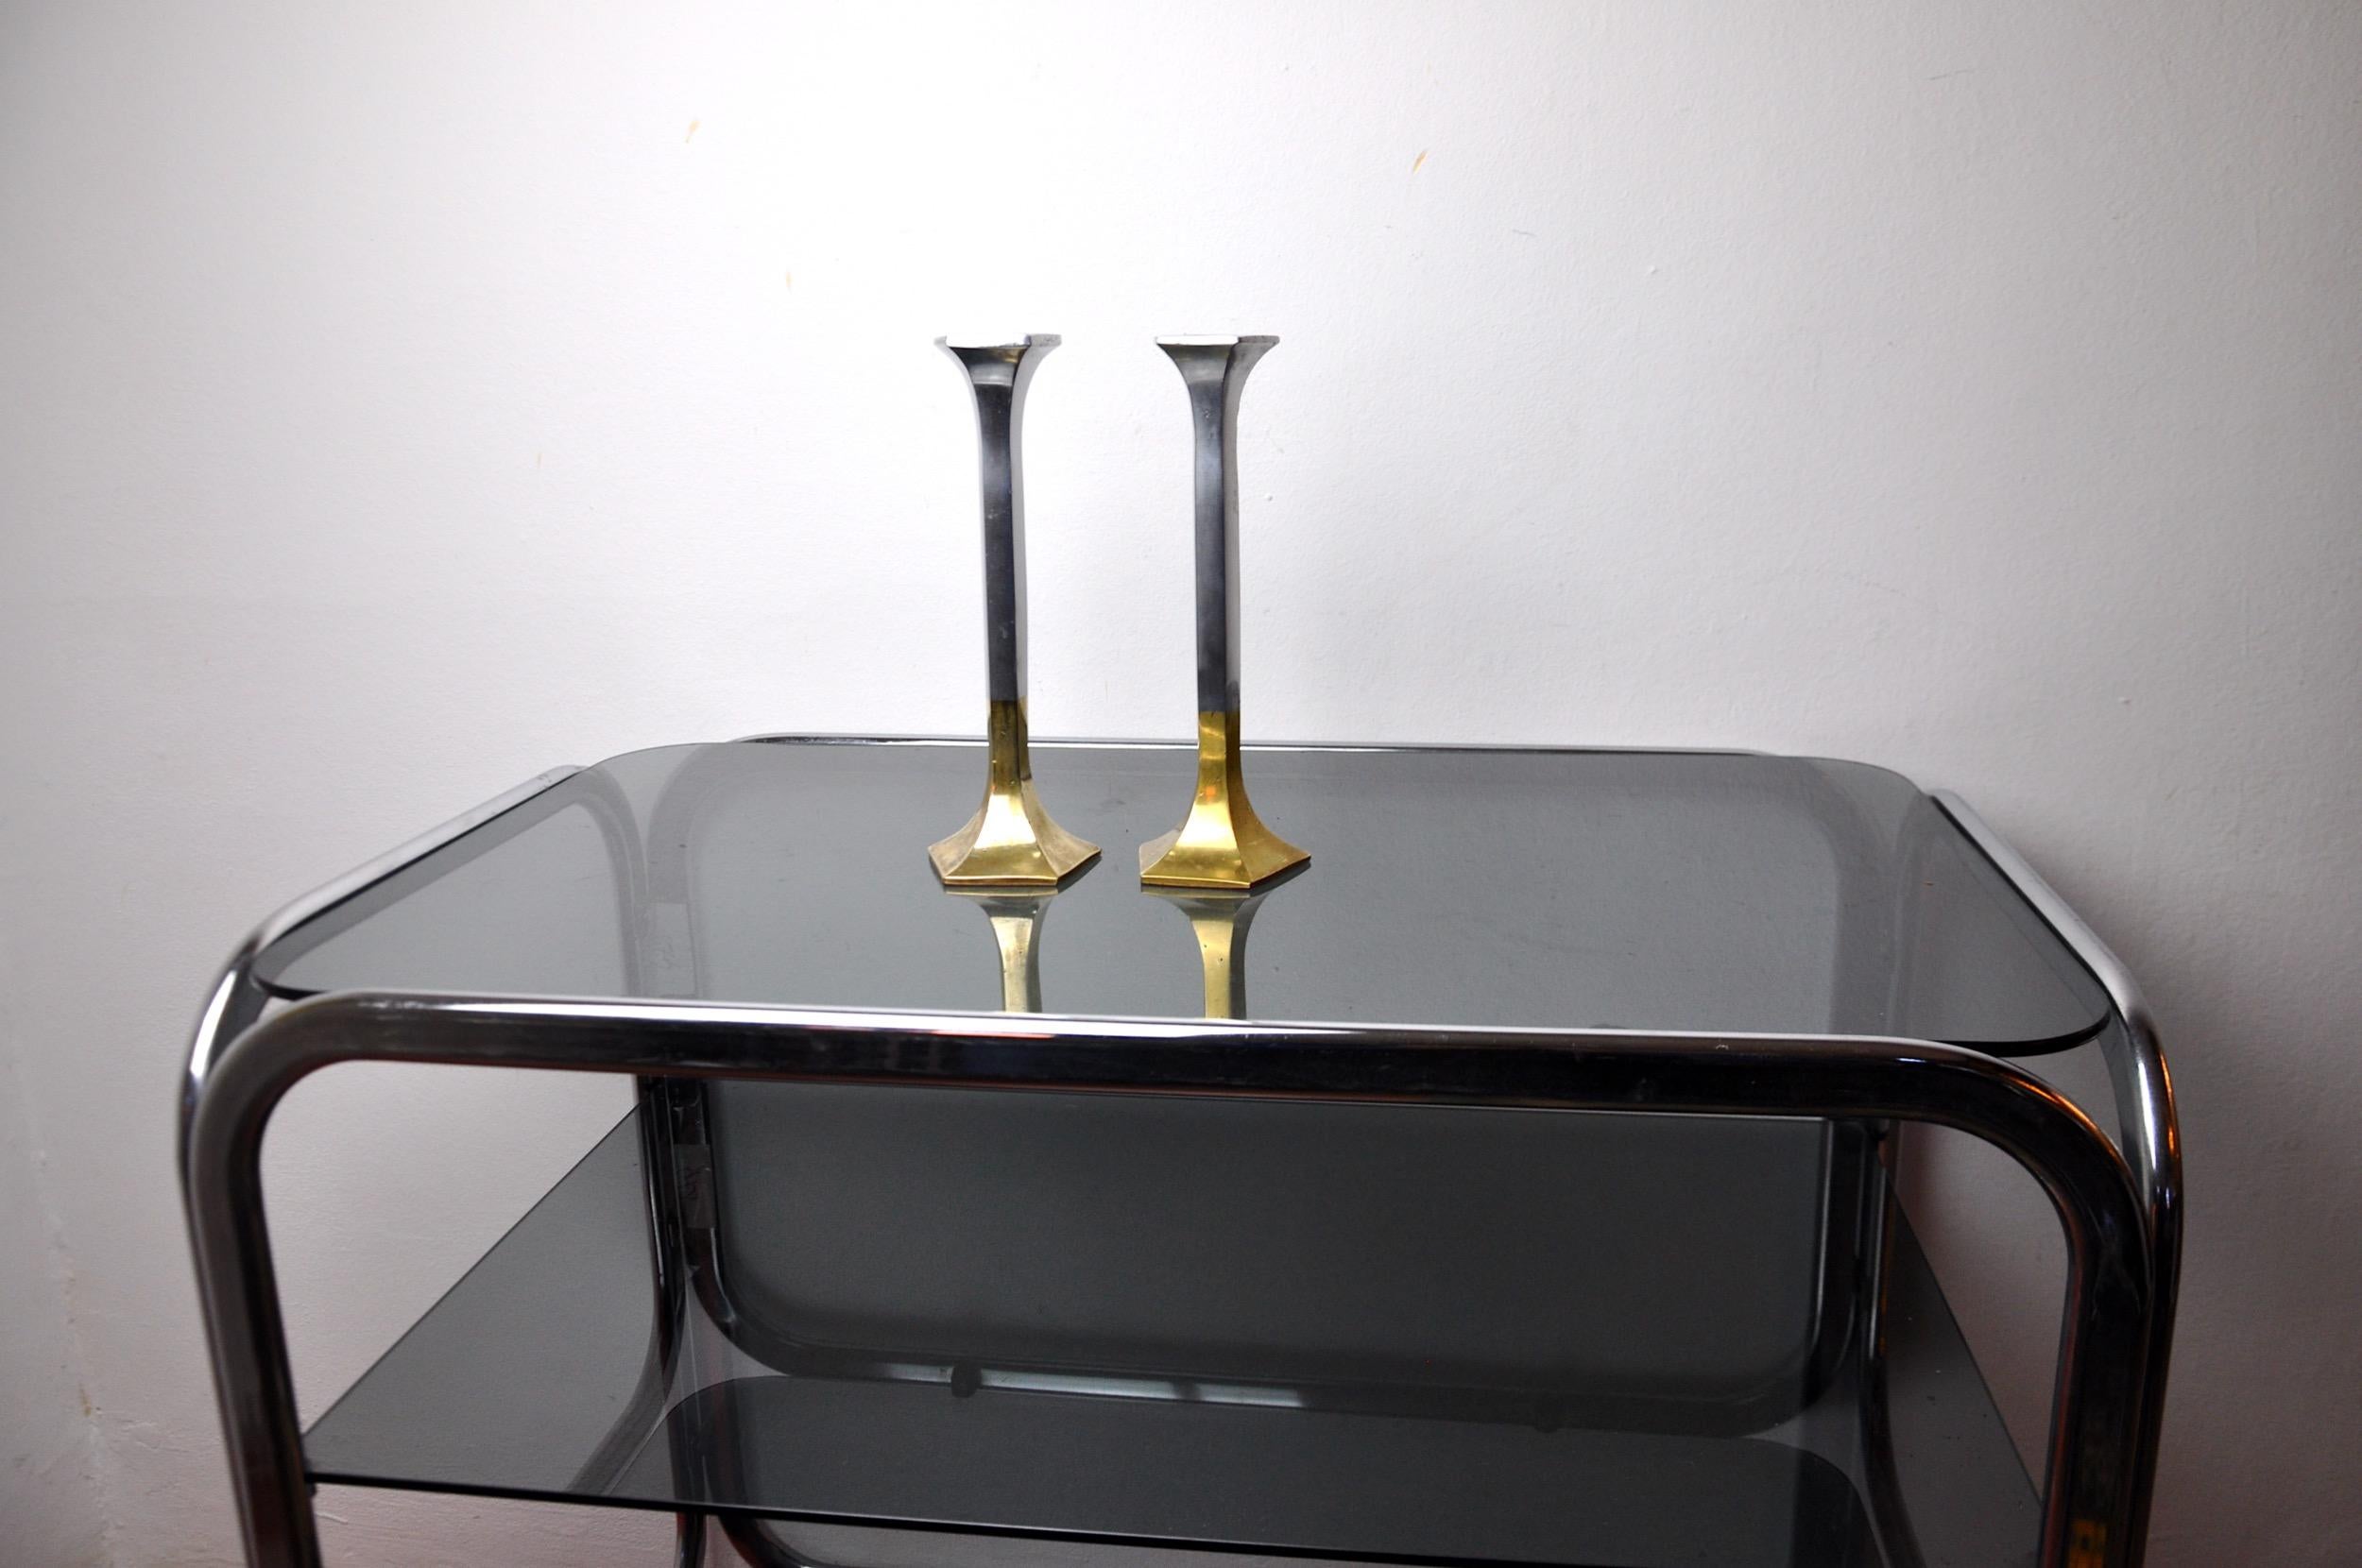 Spanish Pair of Brutalist Candlesticks by David Marshall, Spain, circa 1980 For Sale